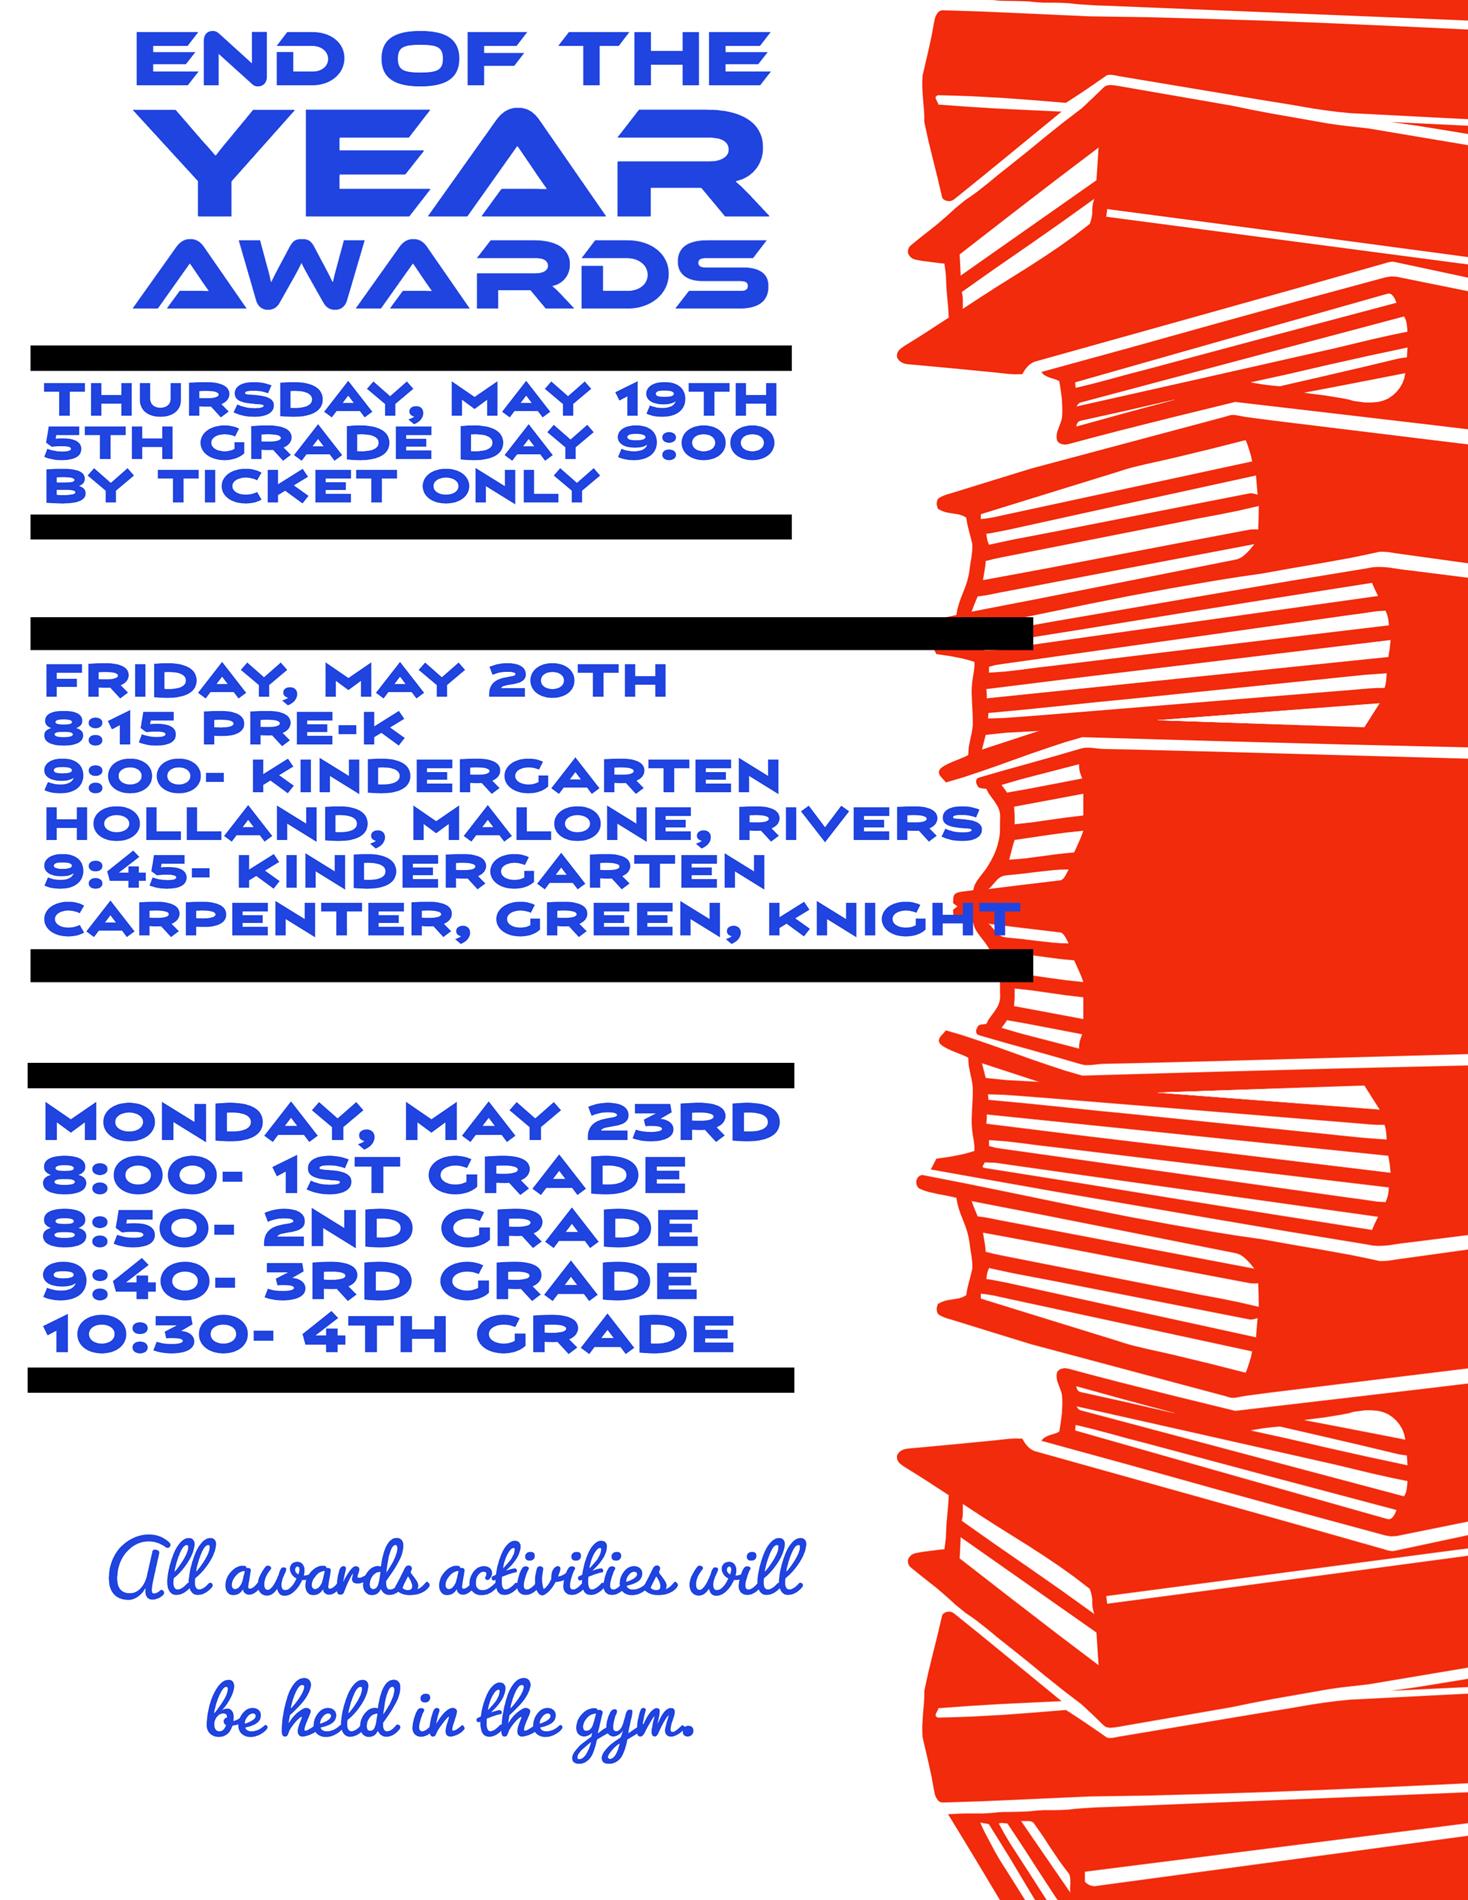 End of the Year awards dates and times 